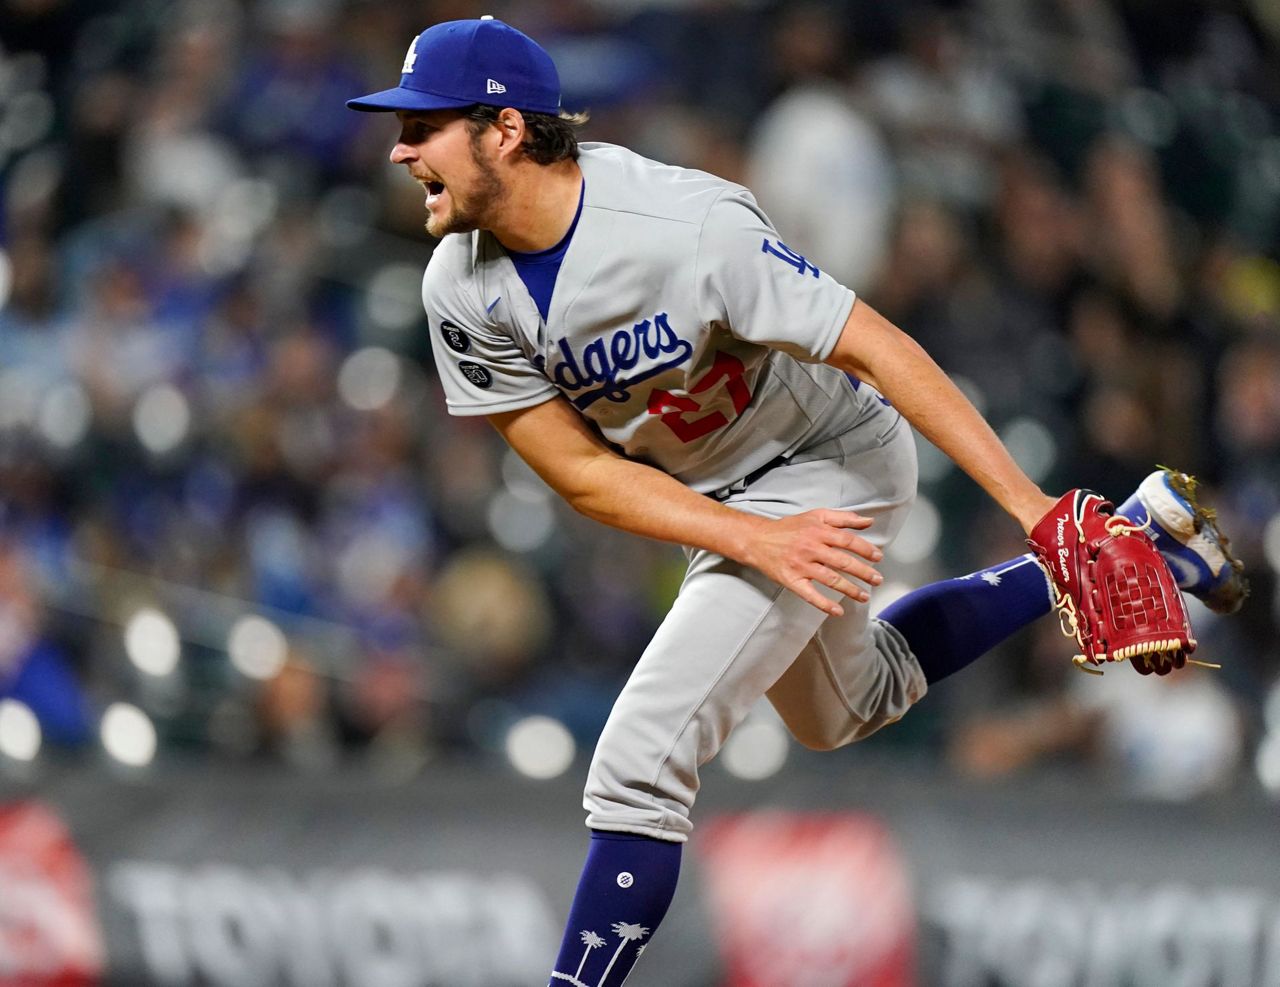 Bauer has no-hitter through 6 innings in Dodgers debut